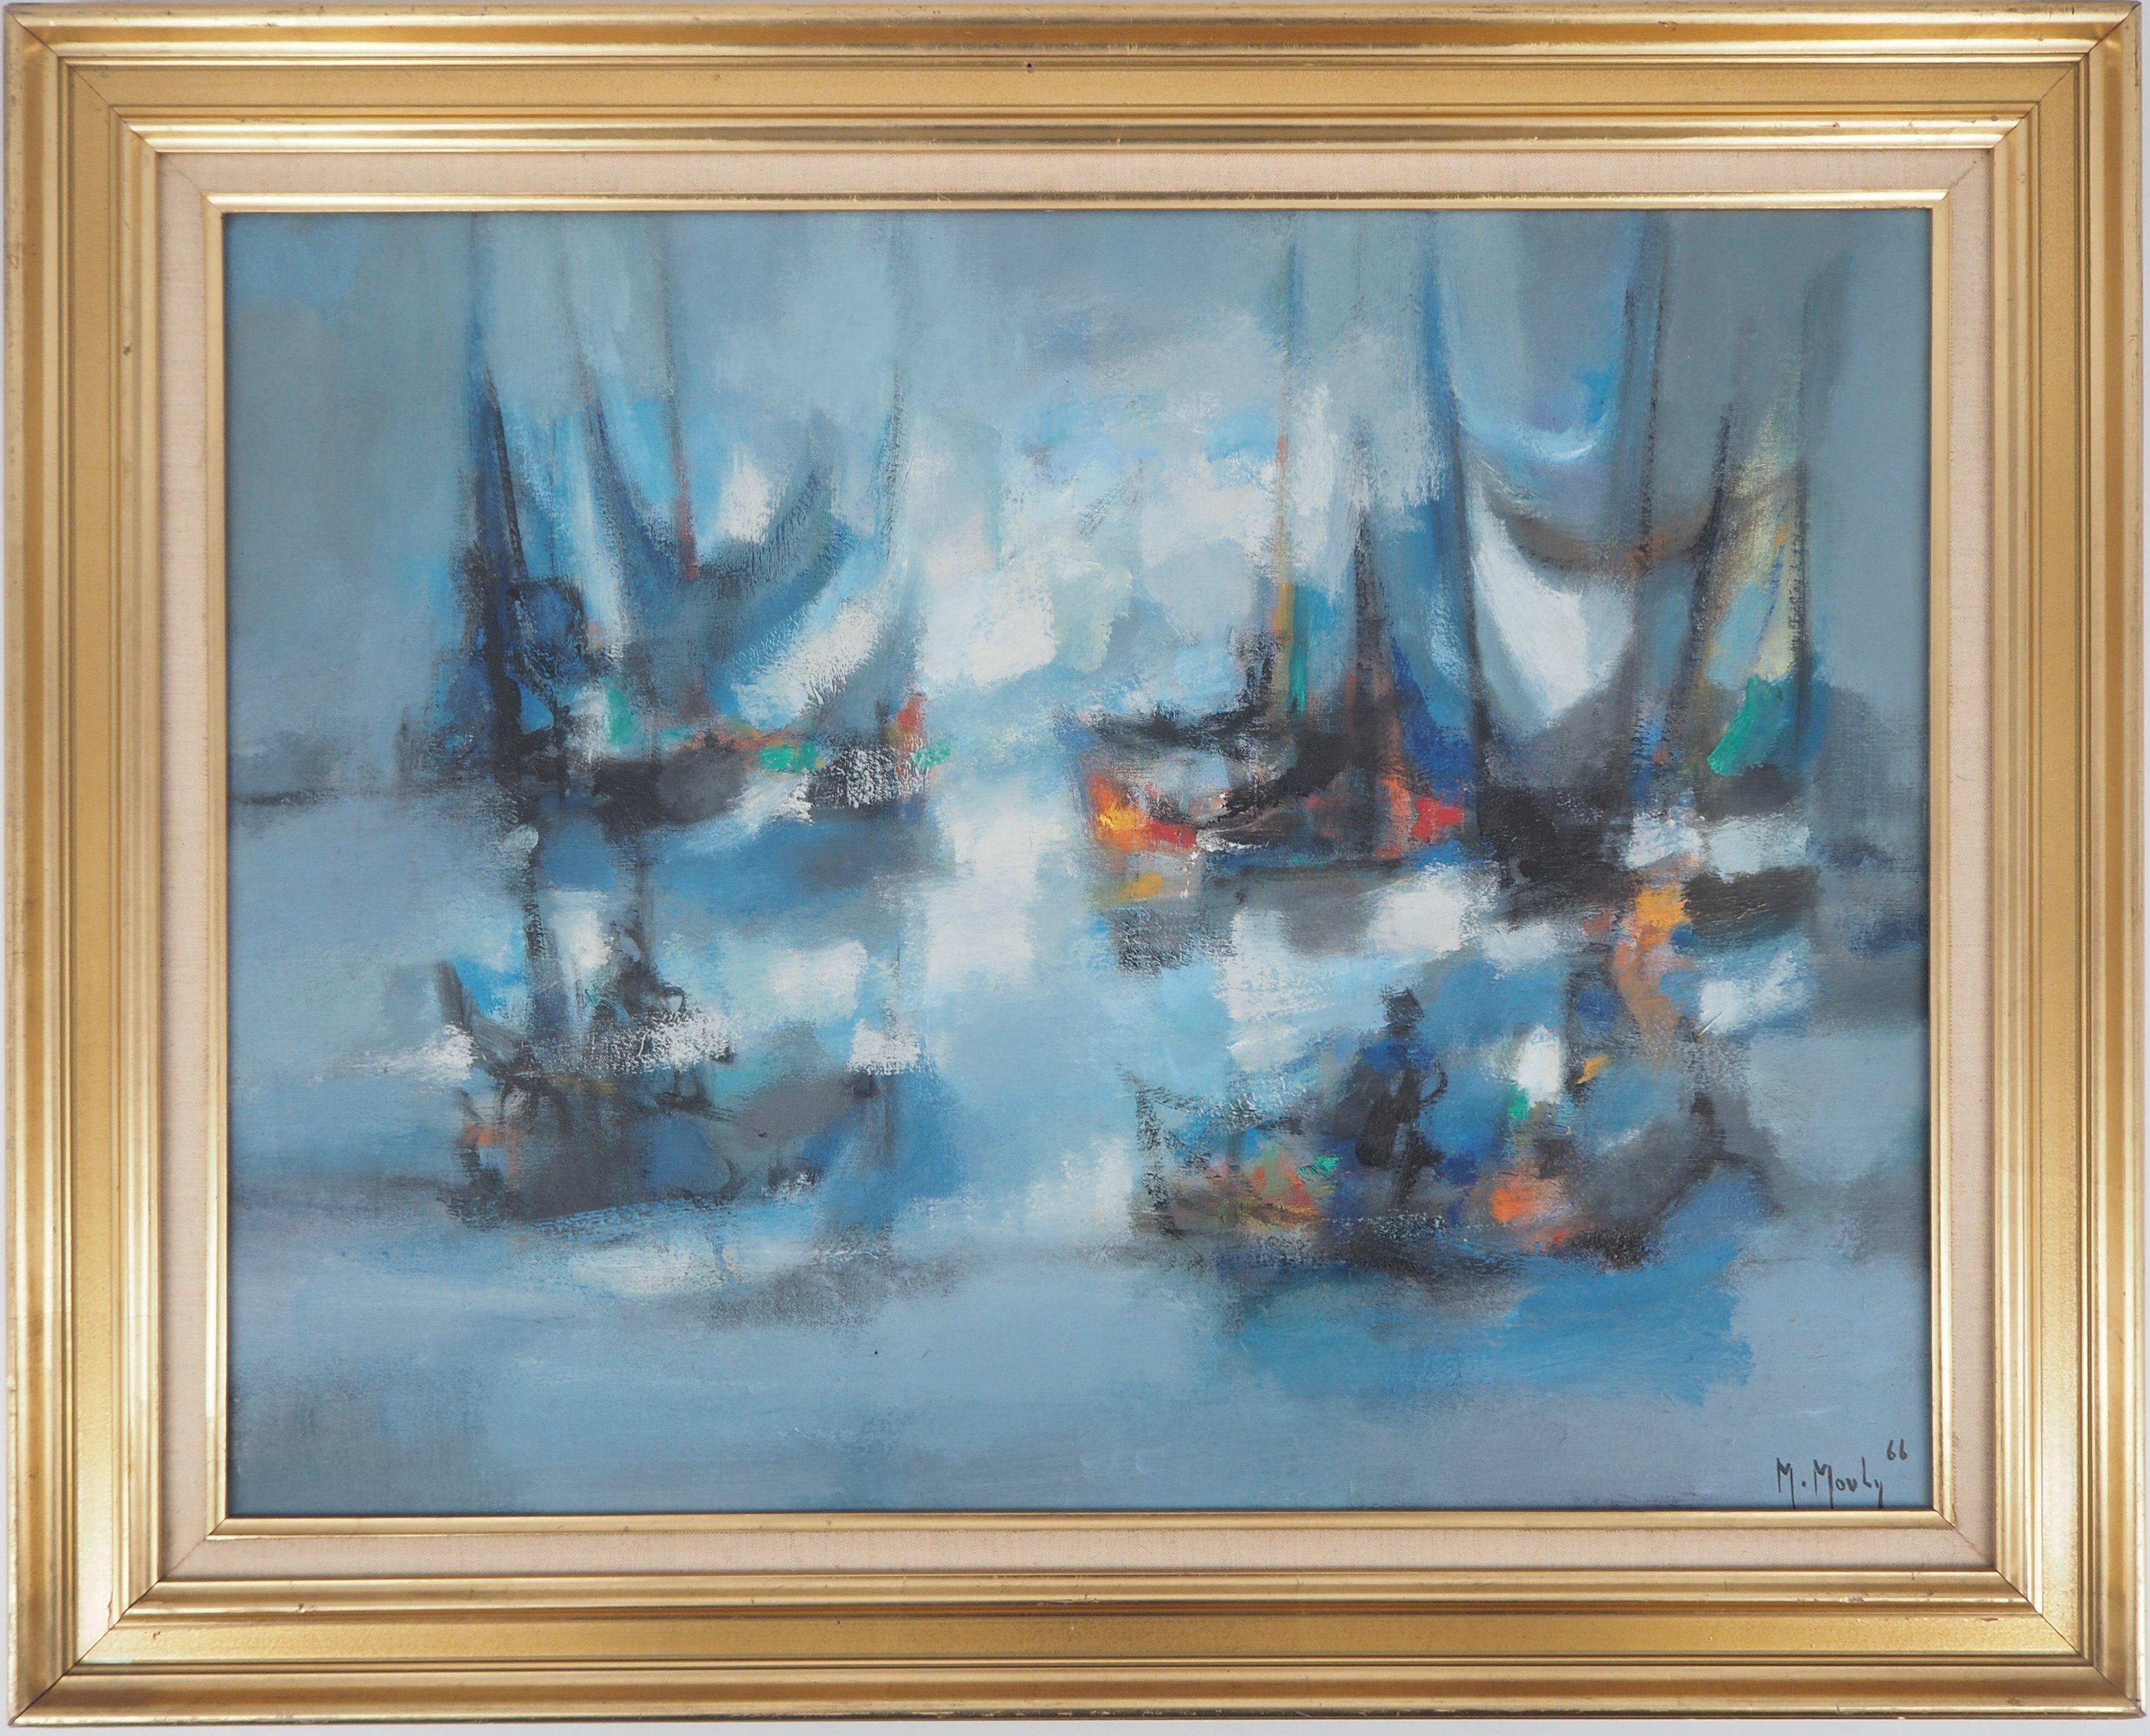 Marcel Mouly Landscape Painting - Boats : The Blue Sails - Original oil painting on canvas, Handsigned